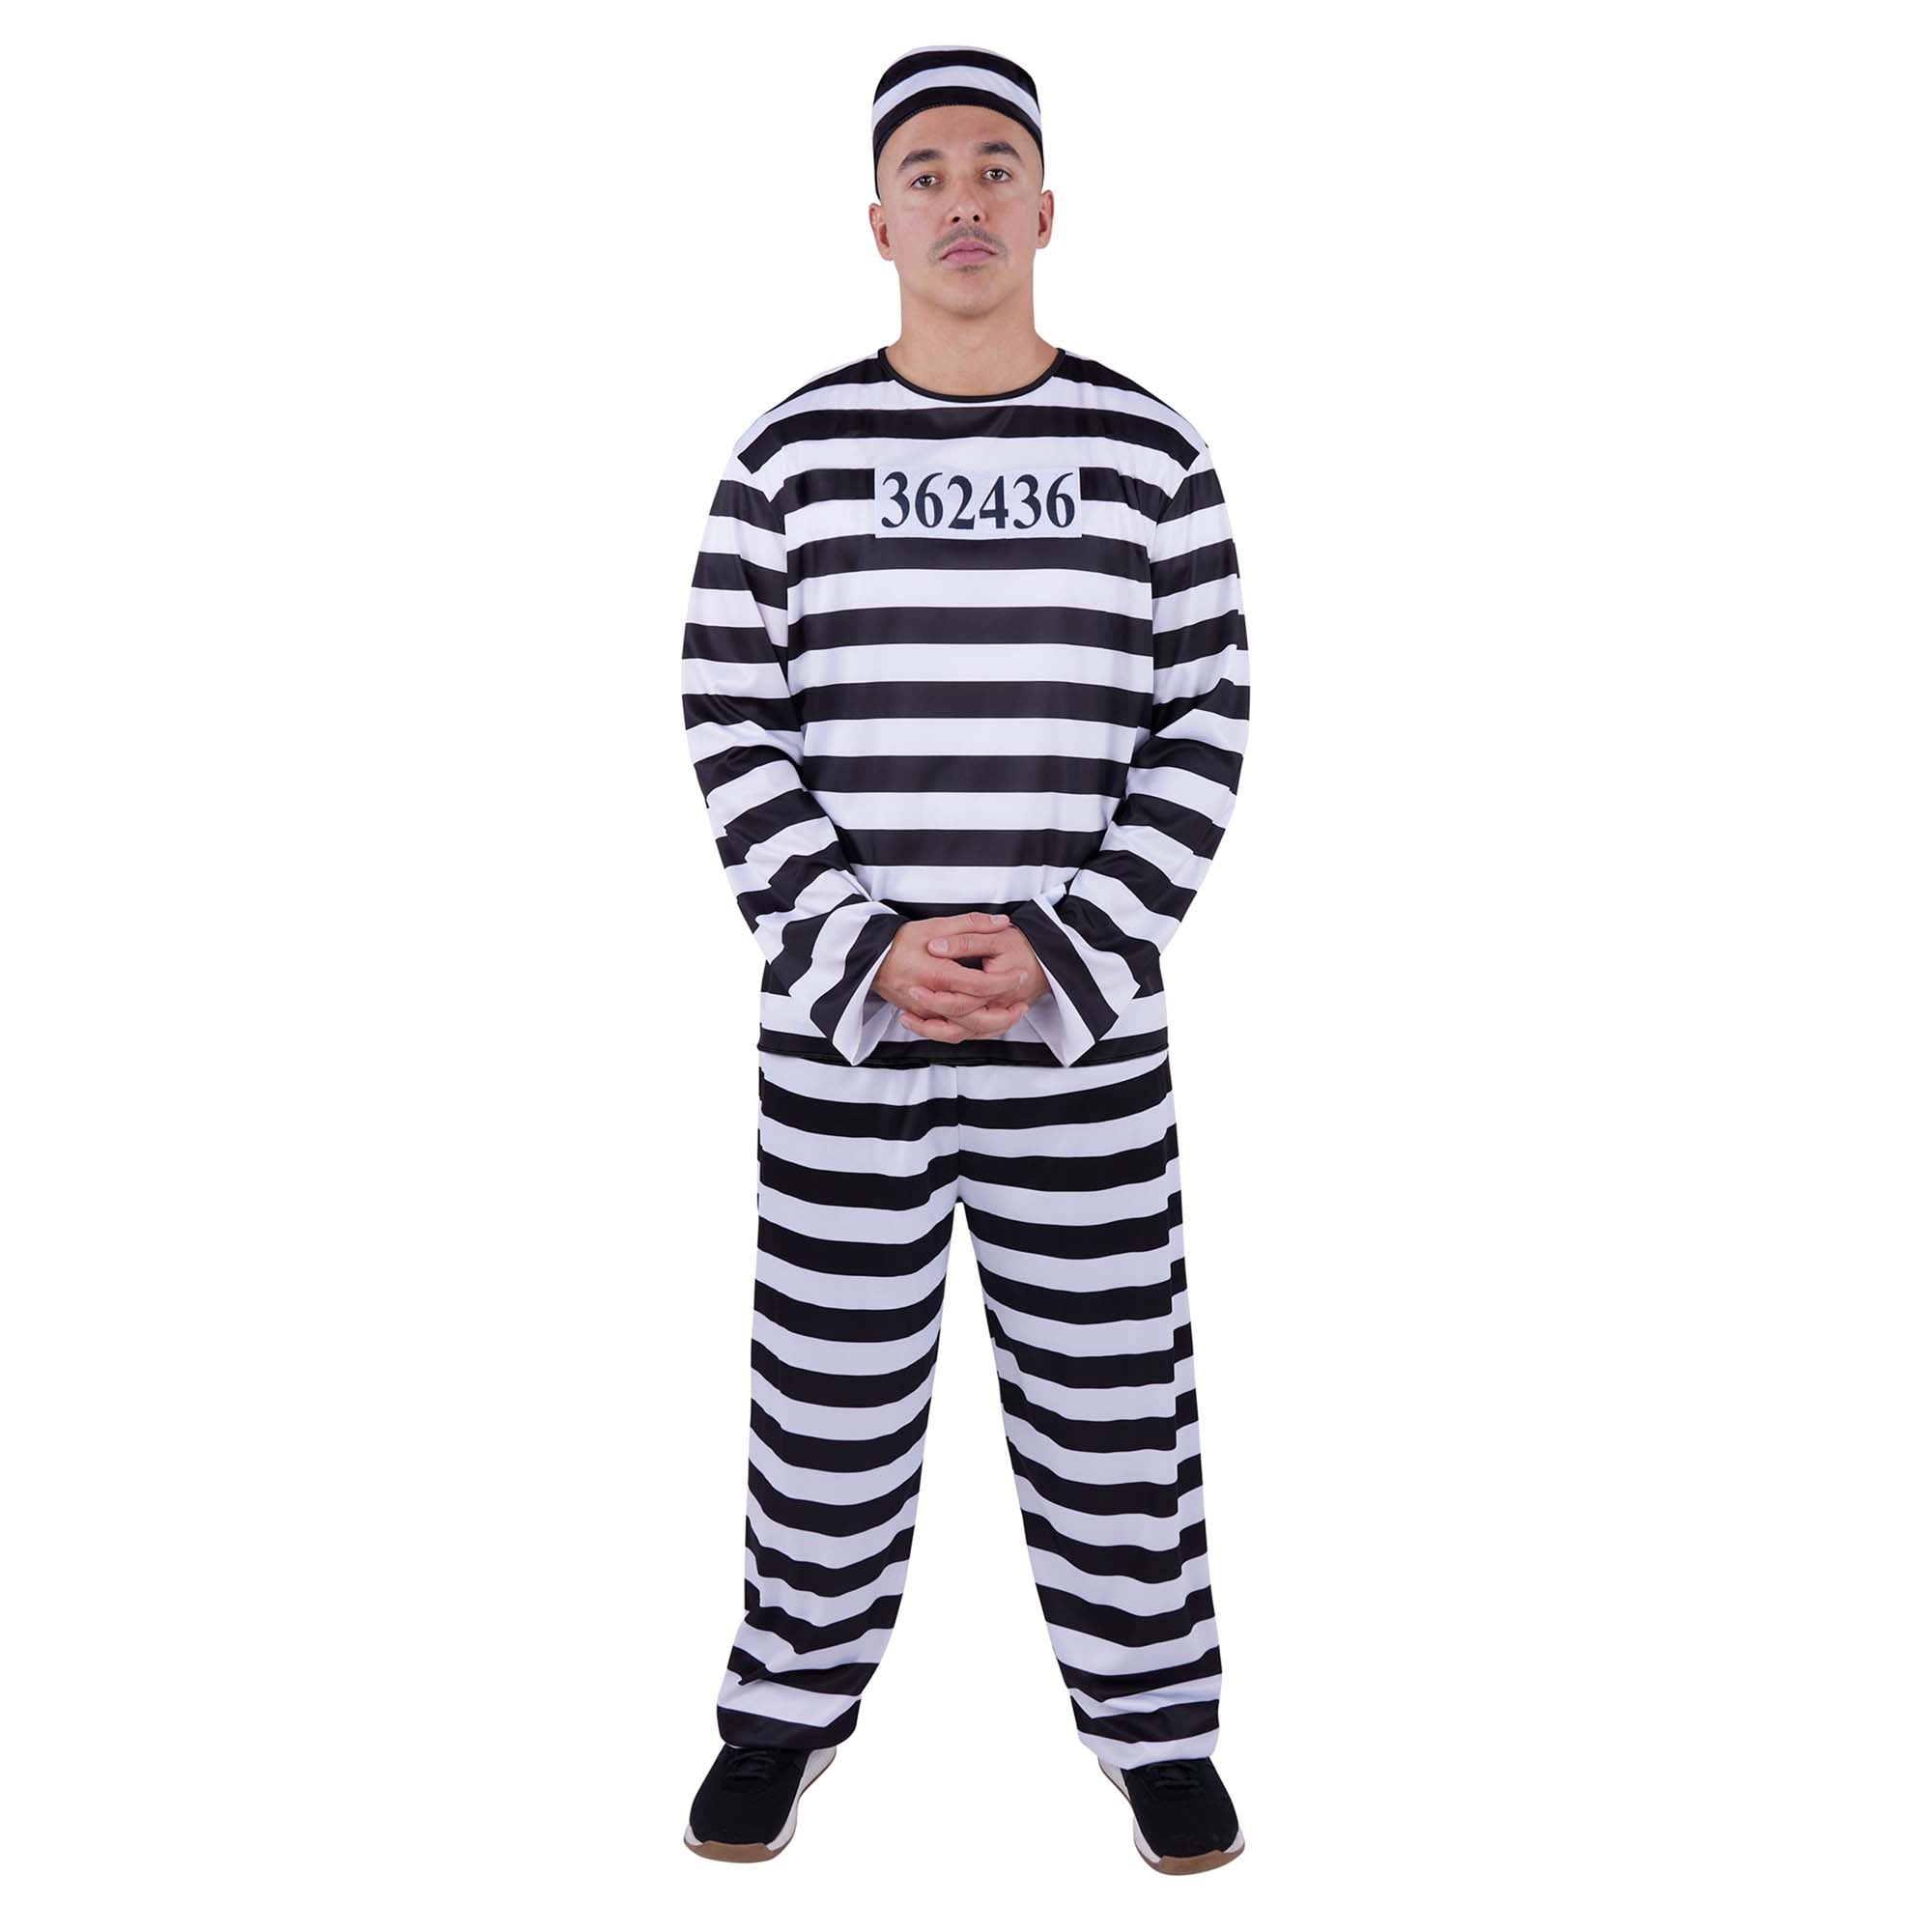 Jailbird Costume for Adults, Black and White Striped Pants and Top